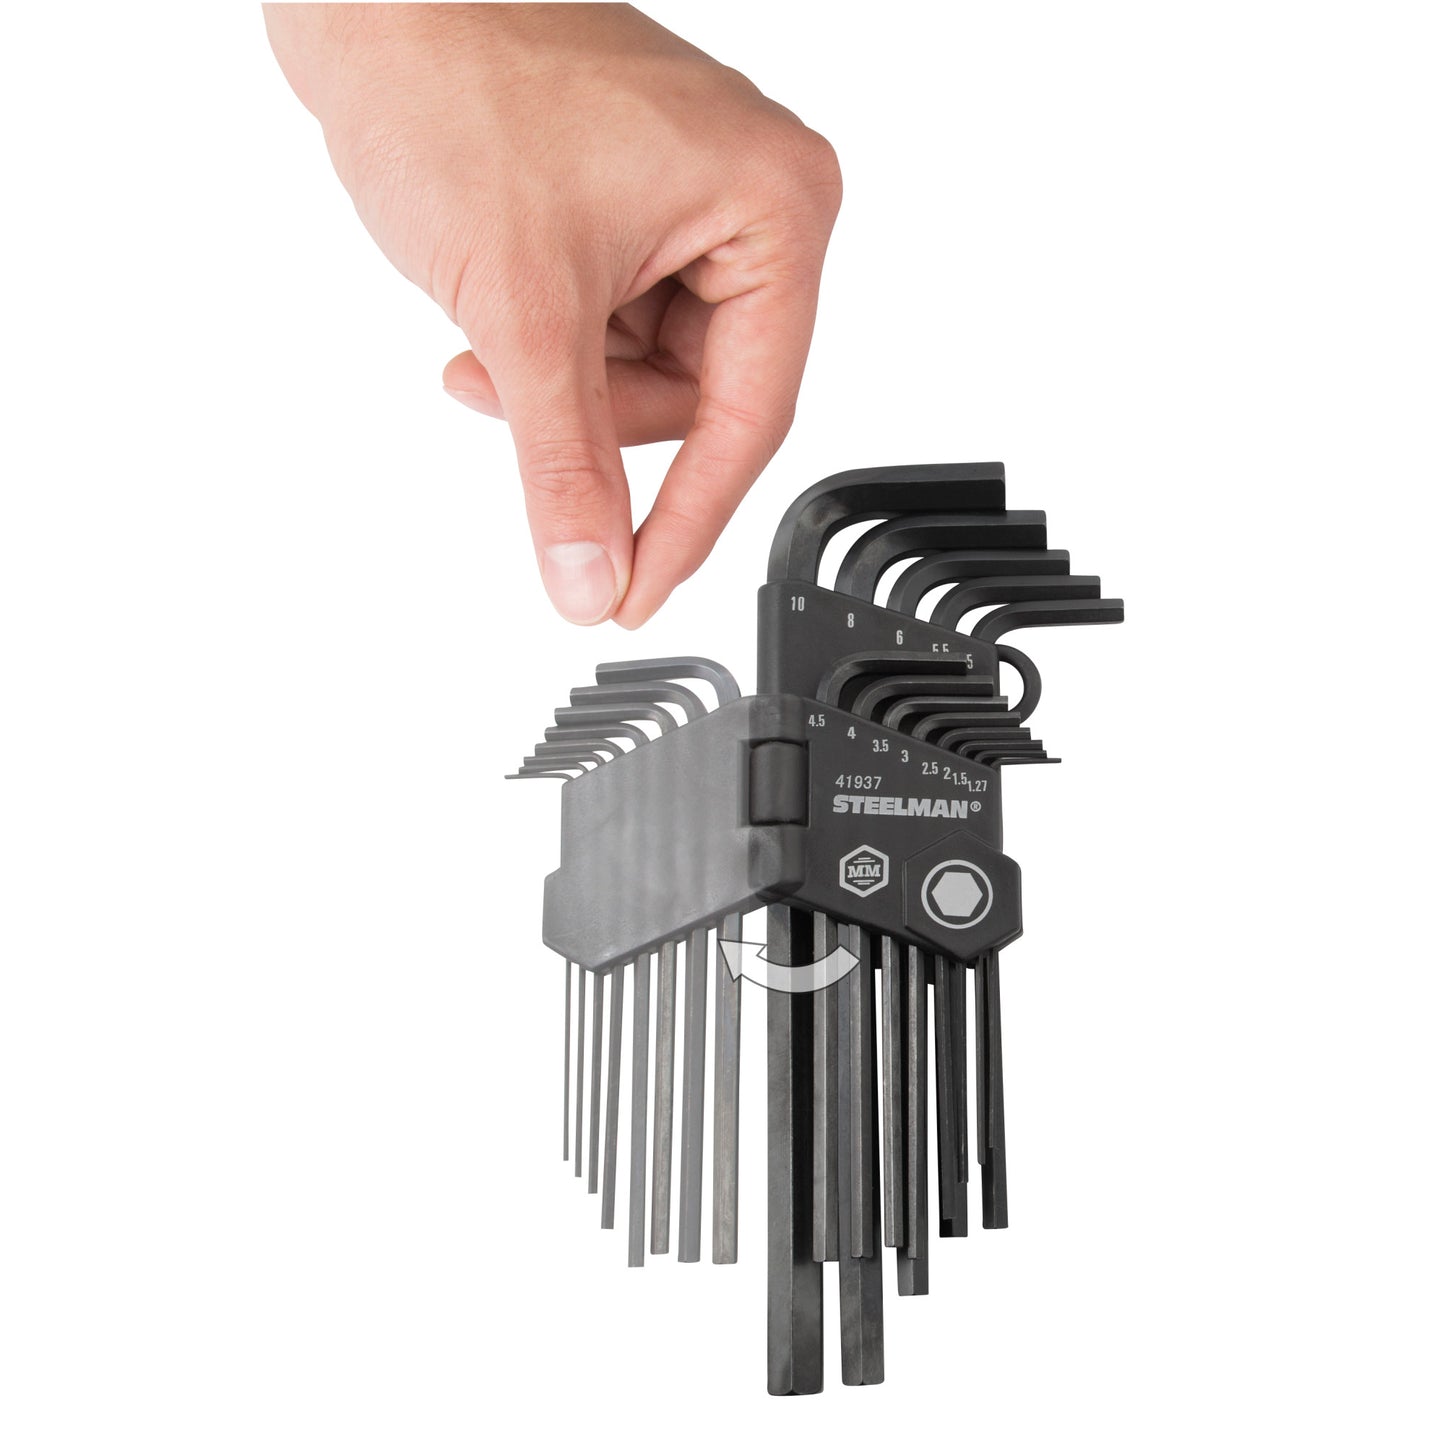 26-Piece Long Arm Hex Key Inch/Metric Wrench Set